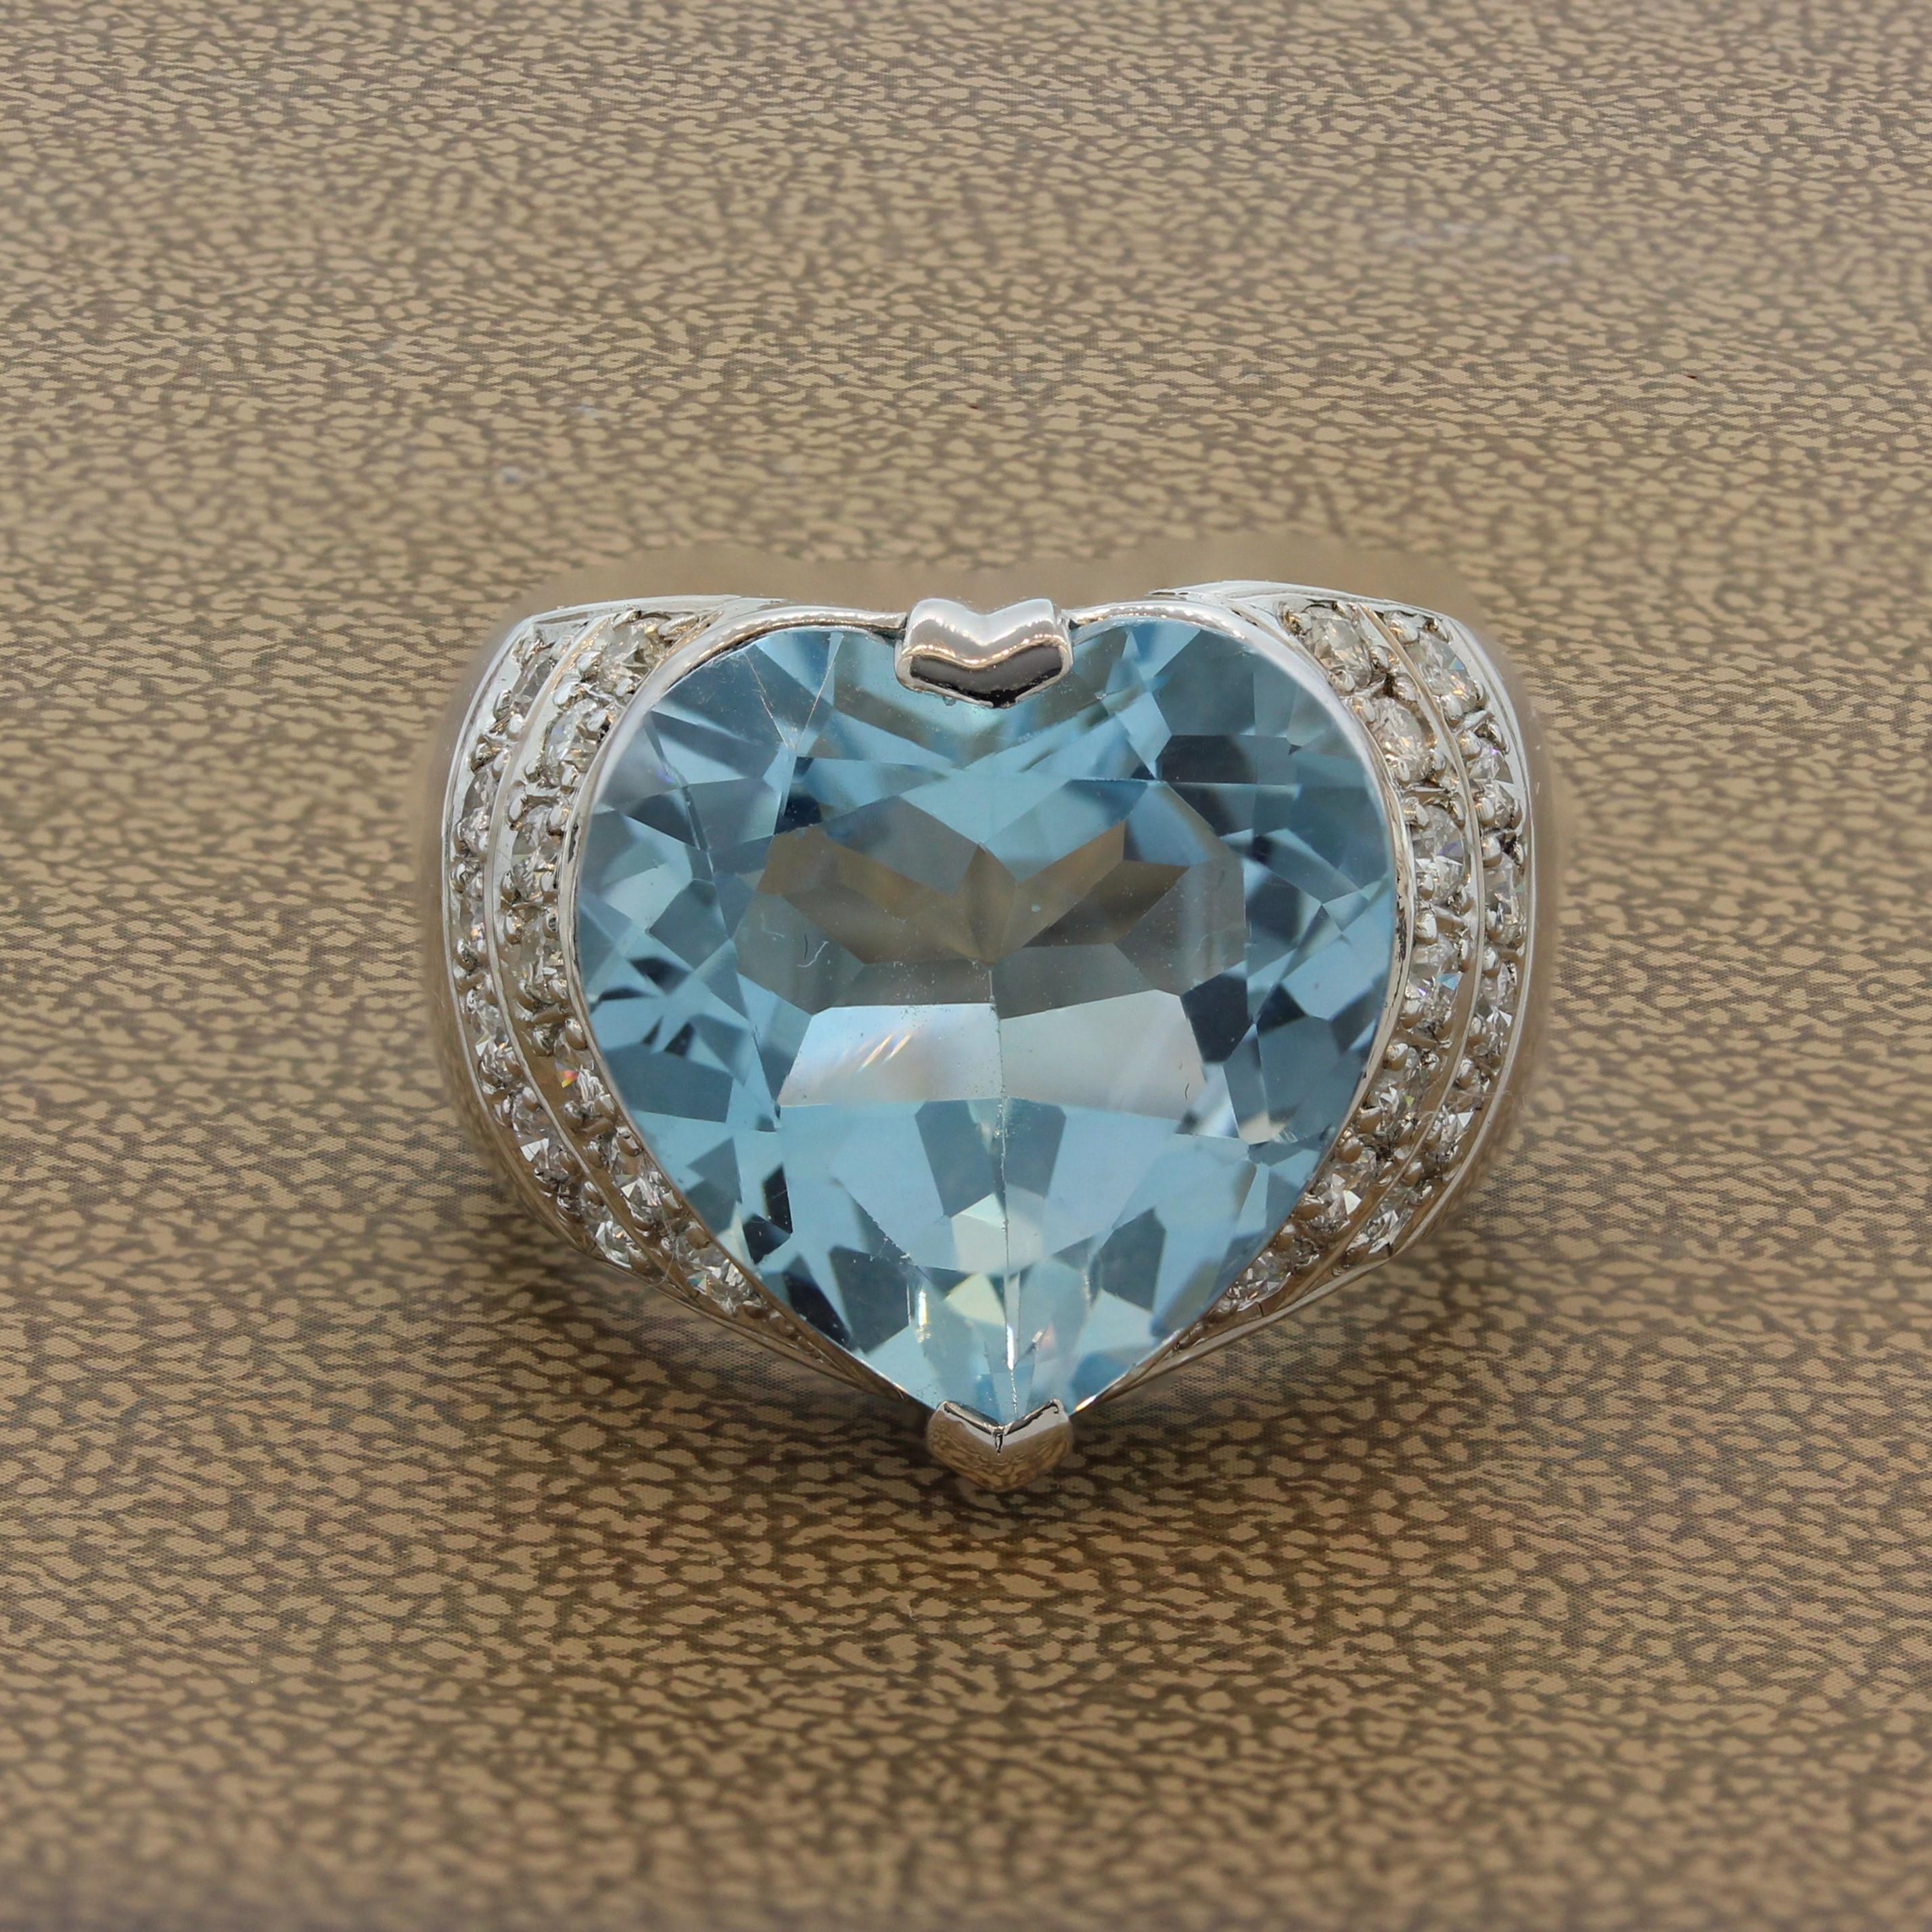 I’m in love! A romantic 17.20 carat heart shape blue topaz is the feature of this luminous ring. Set in platinum with 0.89 carats of round cut diamonds, this ring has sparkle all around.

Ring Size 7.75 (Sizable)
